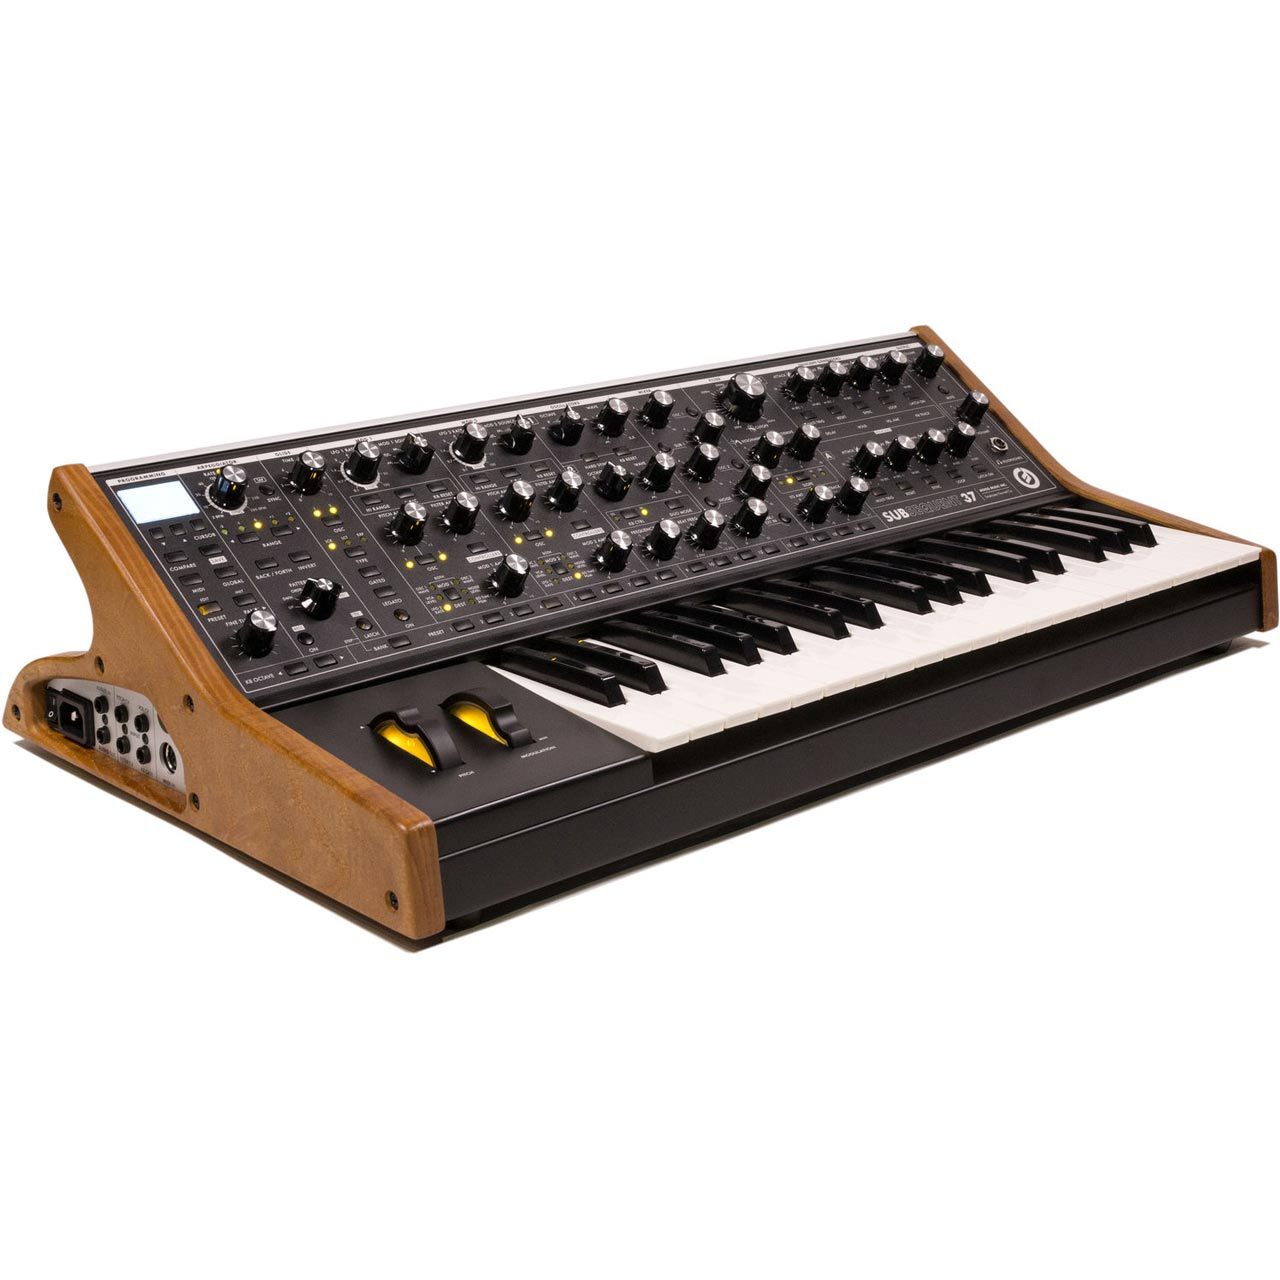 Keyboard Synthesizers - Moog Subsequent 37 Analogue Synthesizer